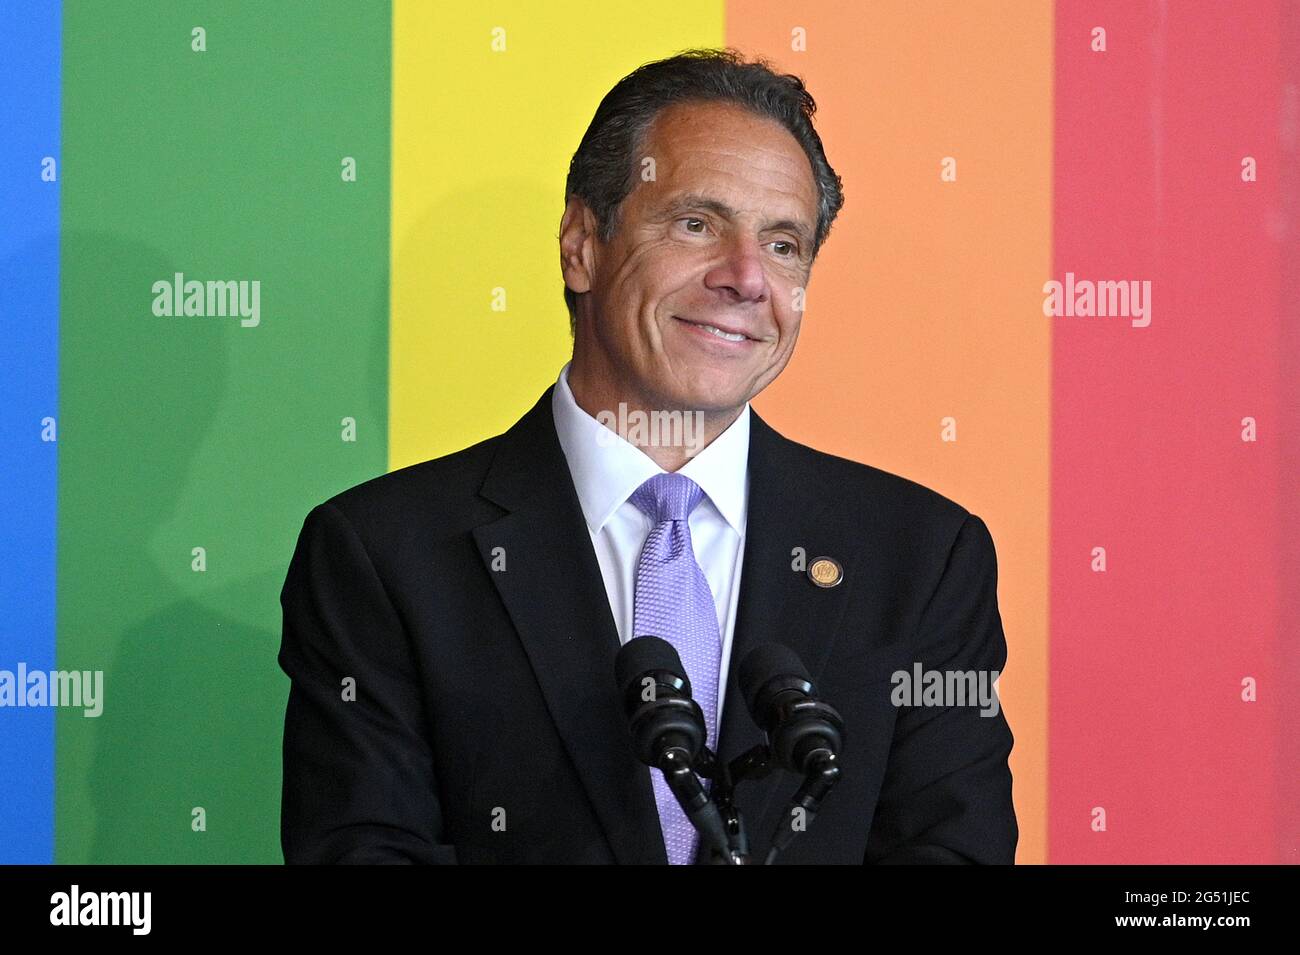 New York, USA. 24th June, 2021. New York Gov. Andrew Cuomo speaks at a ceremony before signing the Gender Recognition Act on the 10th anniversary of the Marriage Equality Act, in honor of Pride Week, at Pier 59 in New York, NY, June 24, 2021. The Gender Recognition Act extends protections for transgender and non-binary New Yorker, allowing people to change their gender on their birth certificates to conform to how they identify themselves. (Photo by Anthony Behar/Sipa USA) Credit: Sipa USA/Alamy Live News Stock Photo